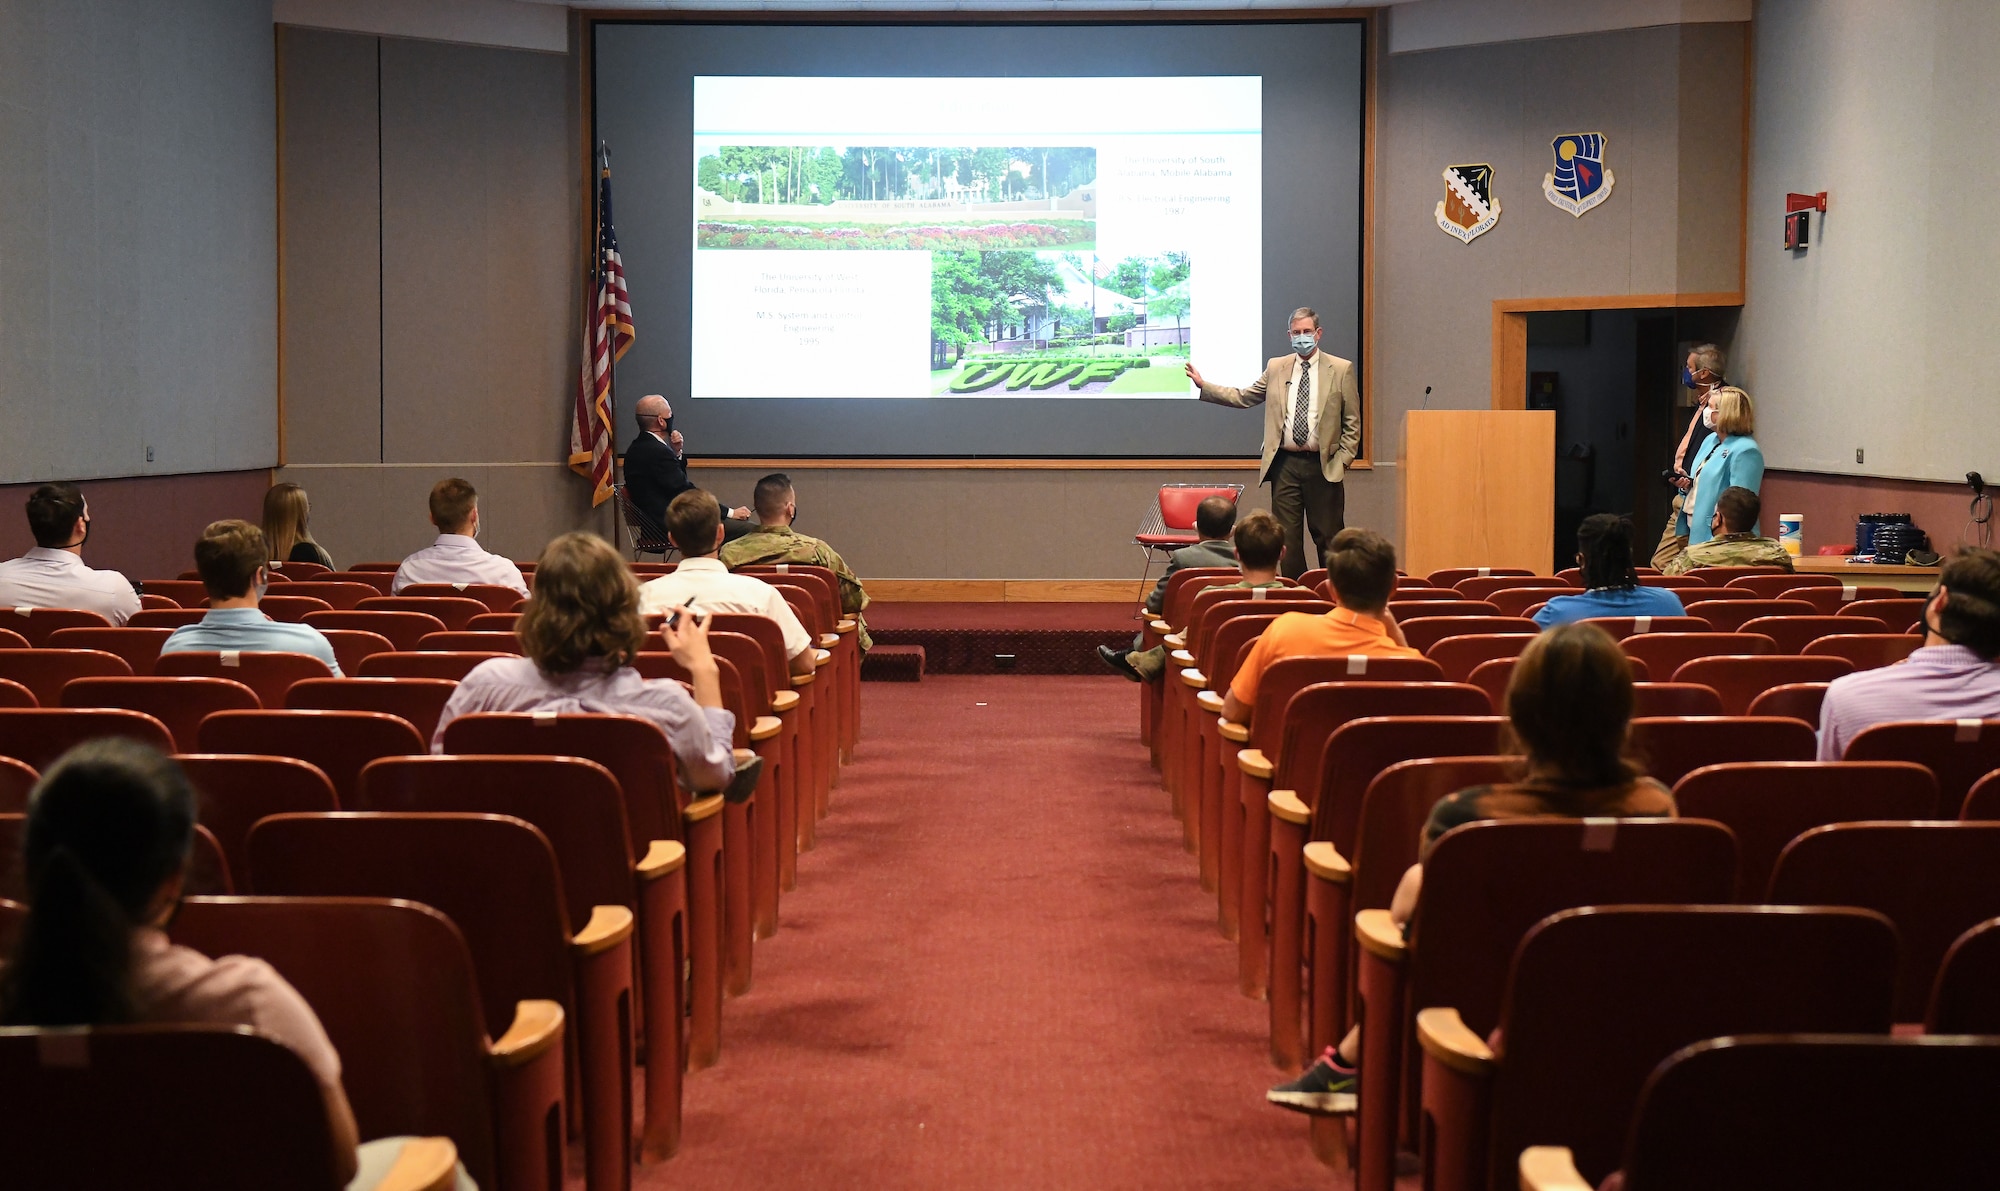 Jason Coker, center, Vice Director of Arnold Engineering Development Complex, speaks about his career path to Air Force and National Aerospace Solutions, LLC (NAS) interns July 15, 2020, during a presentation about career development in the Main Auditorium at Arnold Air Force Base, Tenn. NAS is the Test Operations and Sustainment Contractor for AEDC. (U.S. Air Force photo by Jill Pickett)